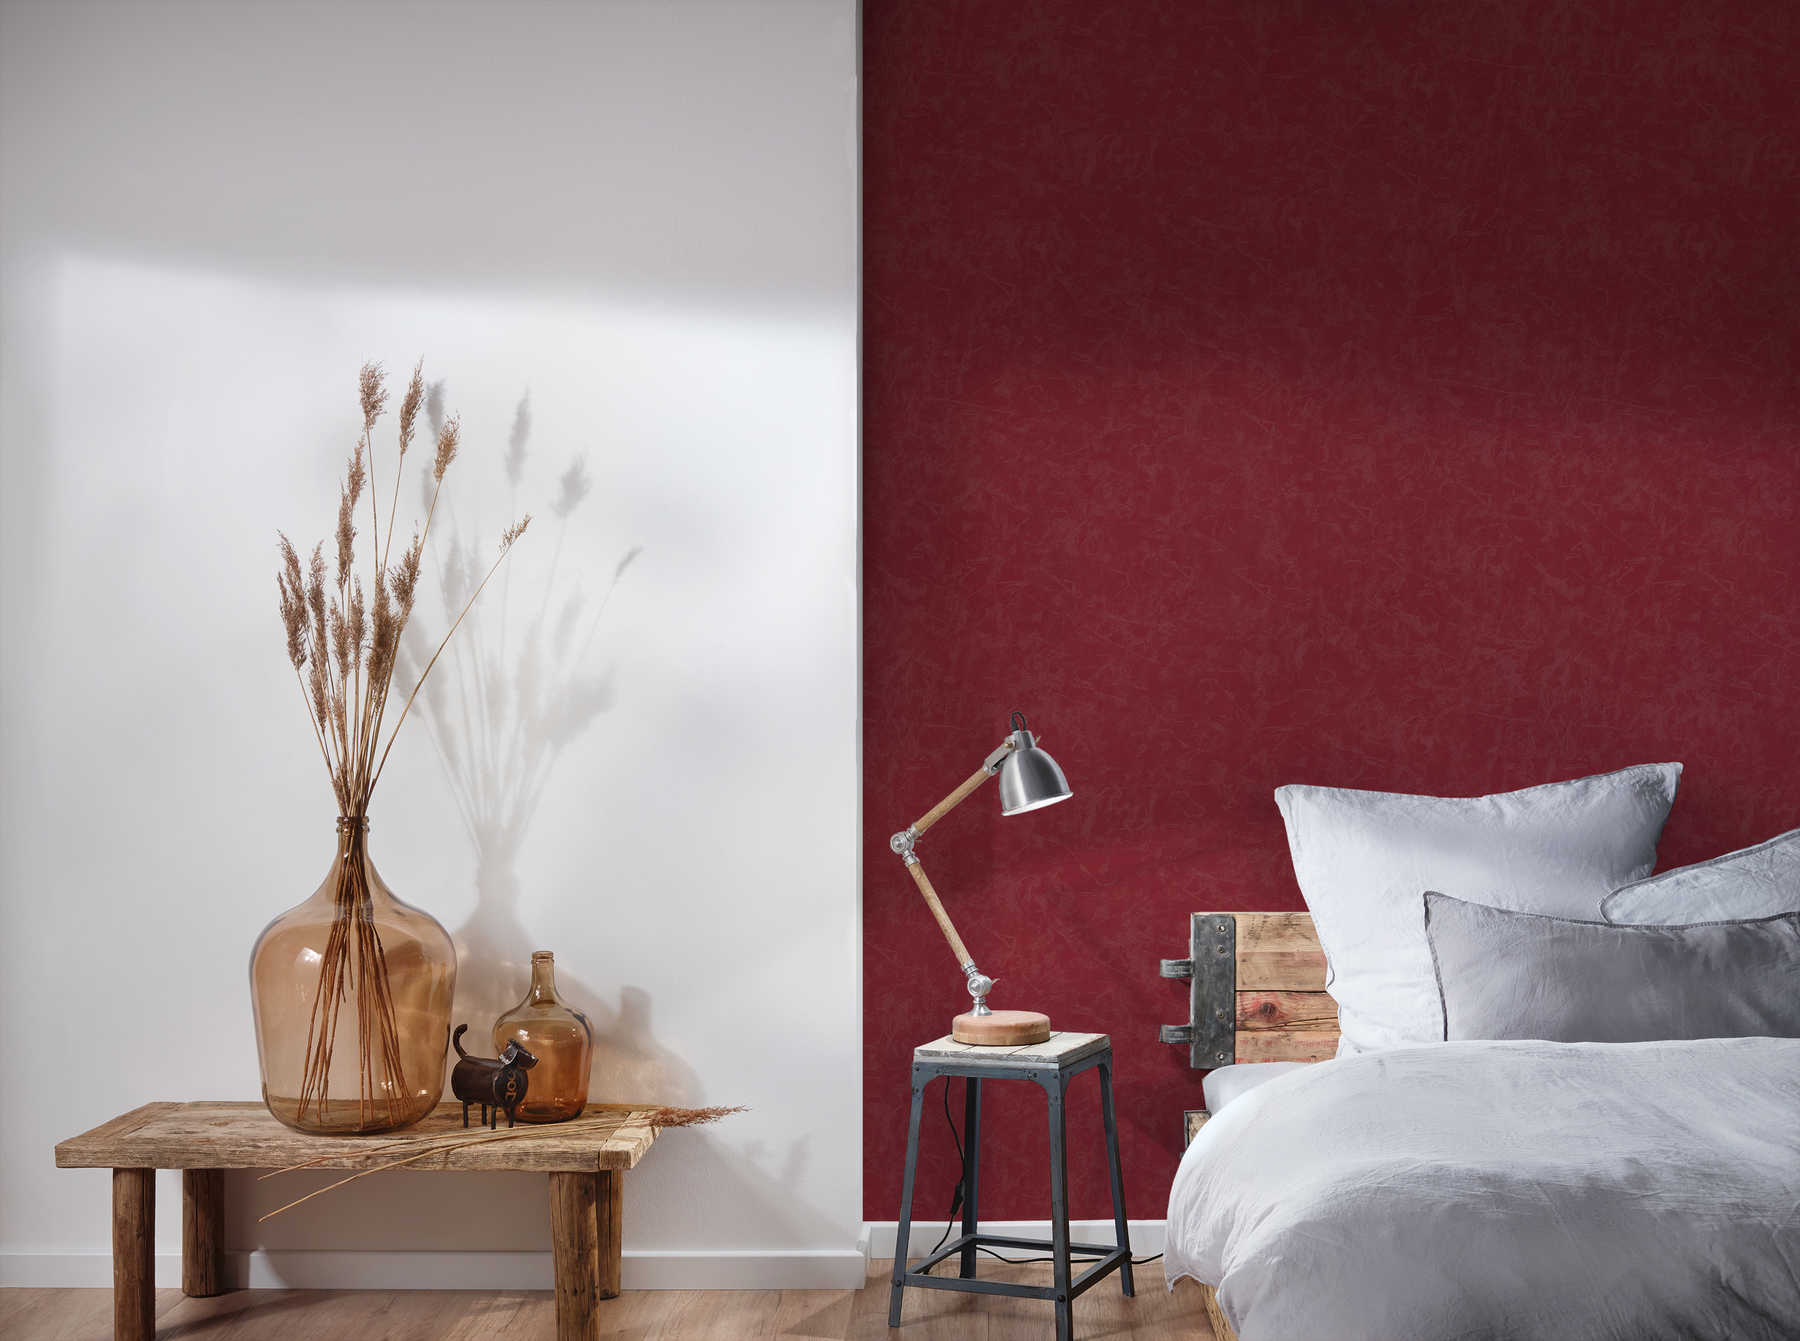             Non-woven wallpaper plains with plaster look & texture pattern - red
        